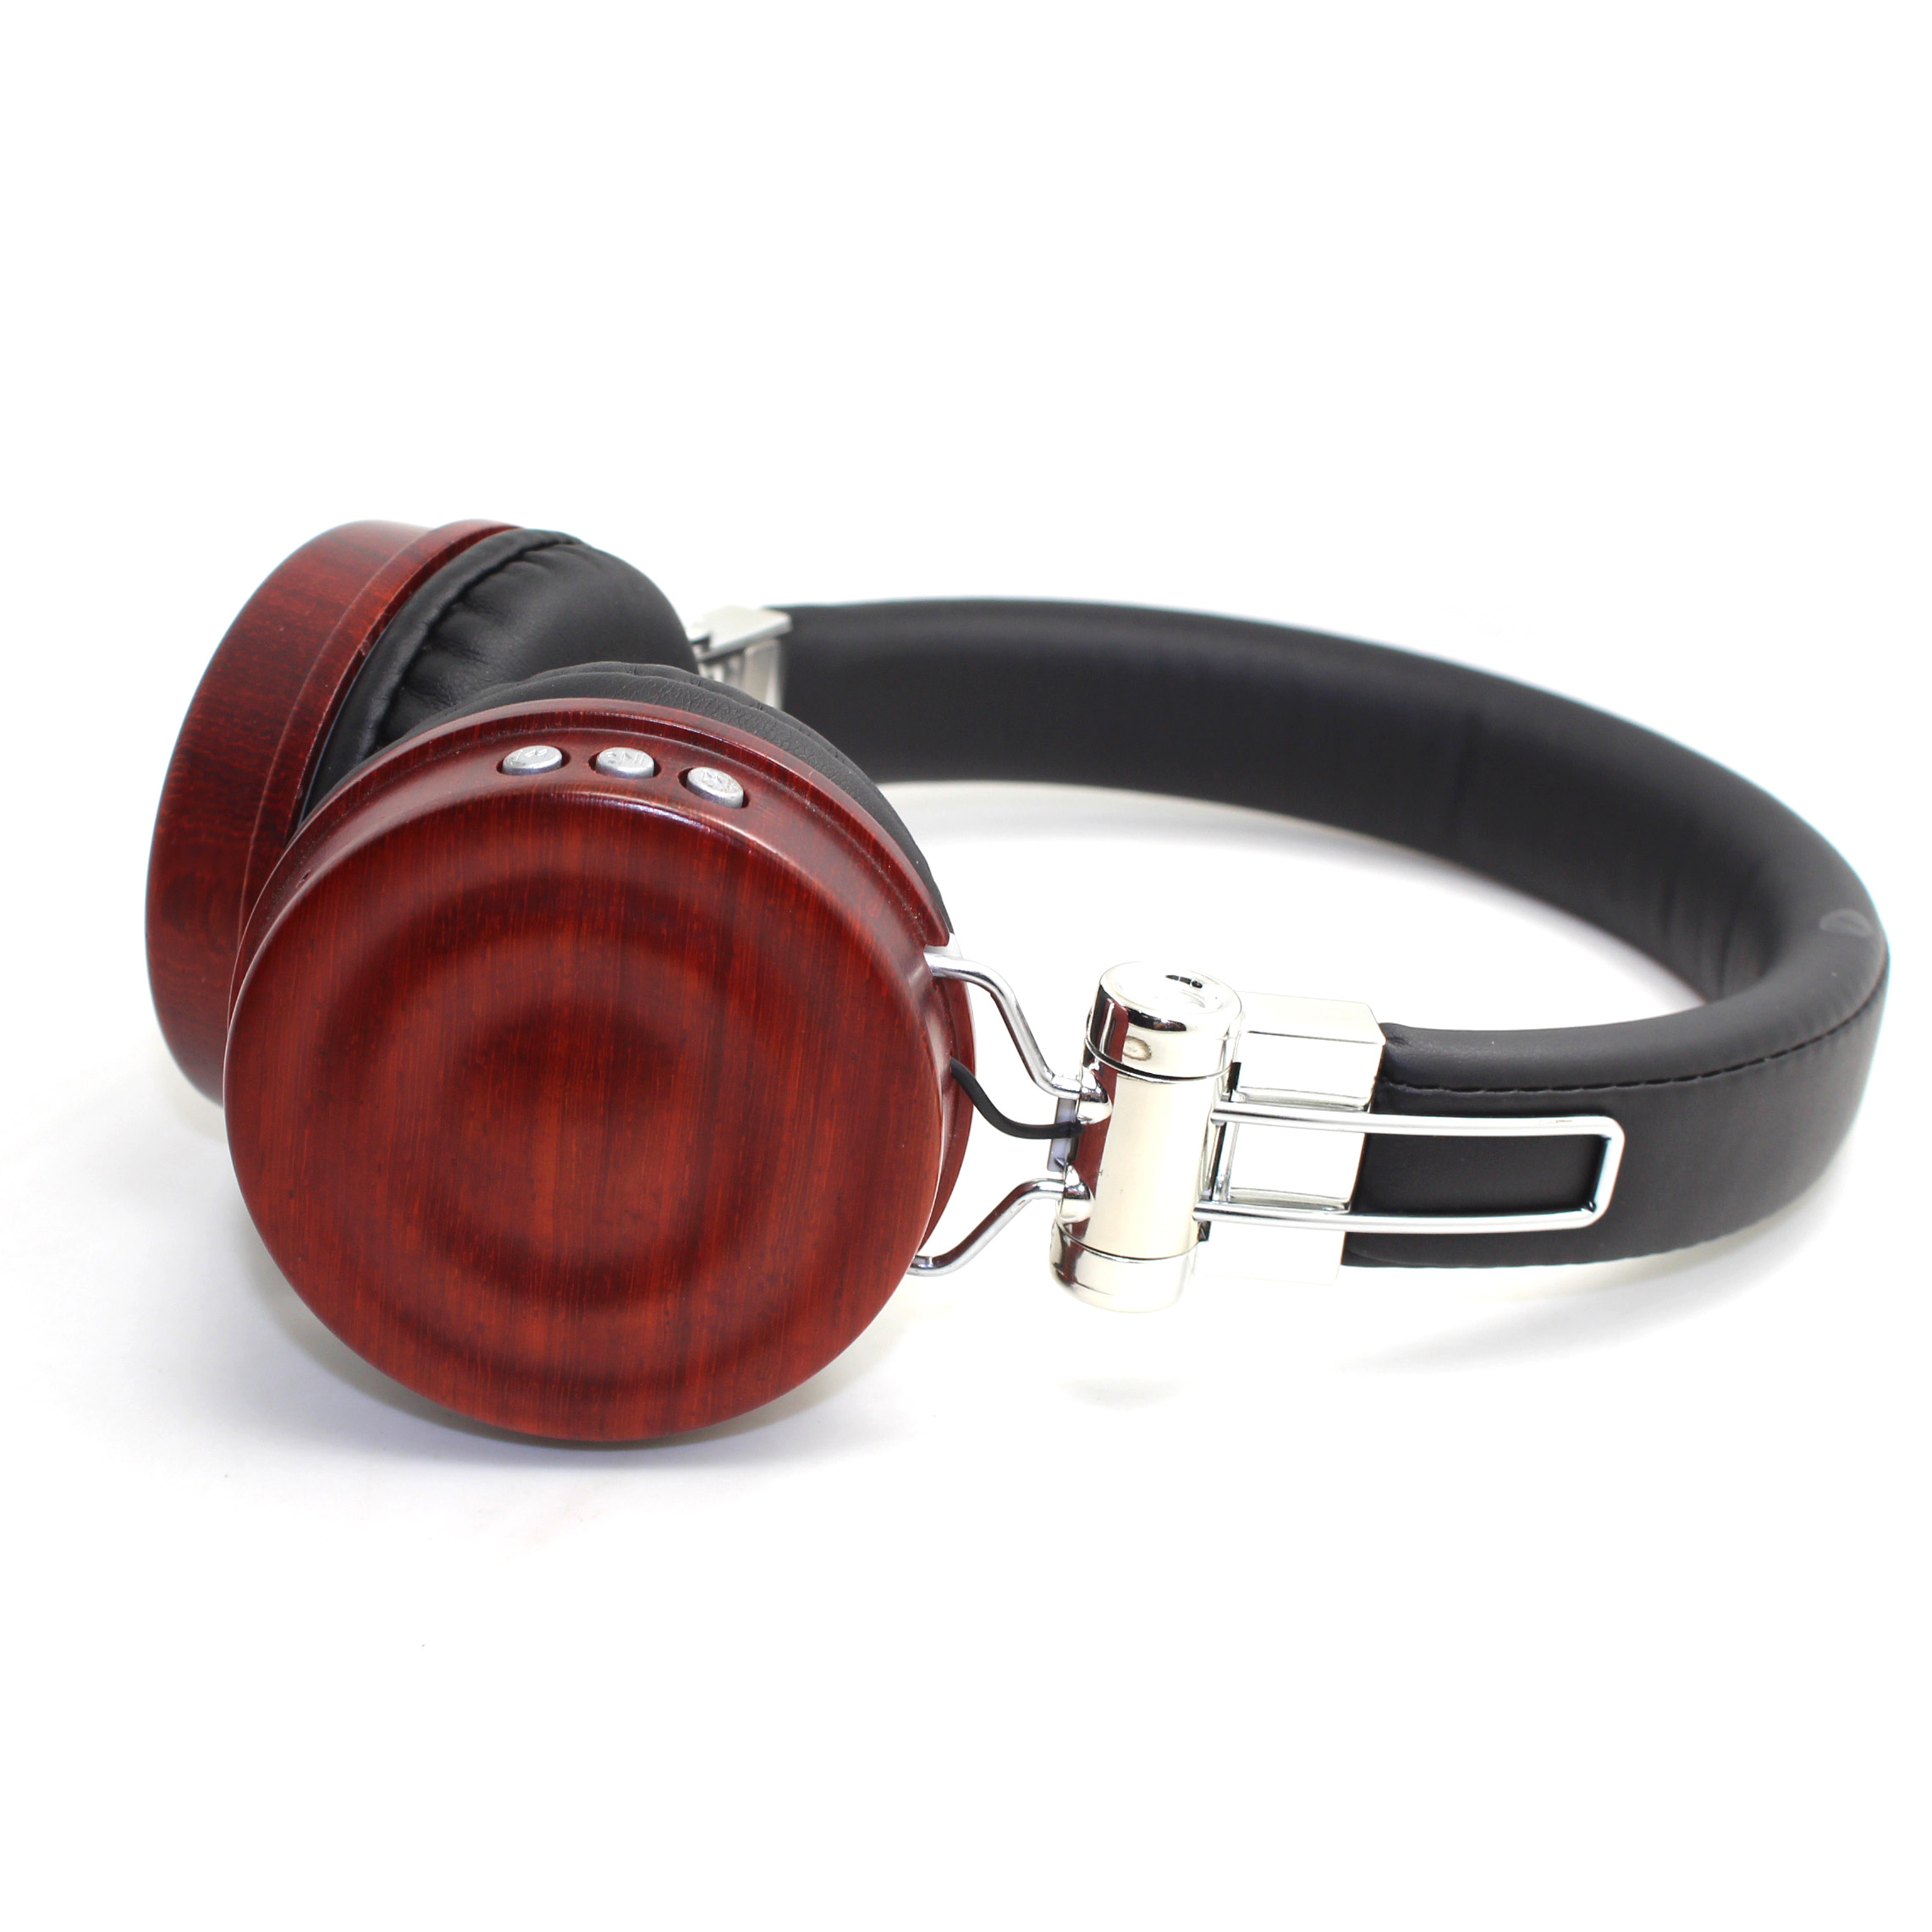 OEM-BL159 Low Price gold metal wood headphones gift bluetooth on ear fashionable wooden headset for (2)